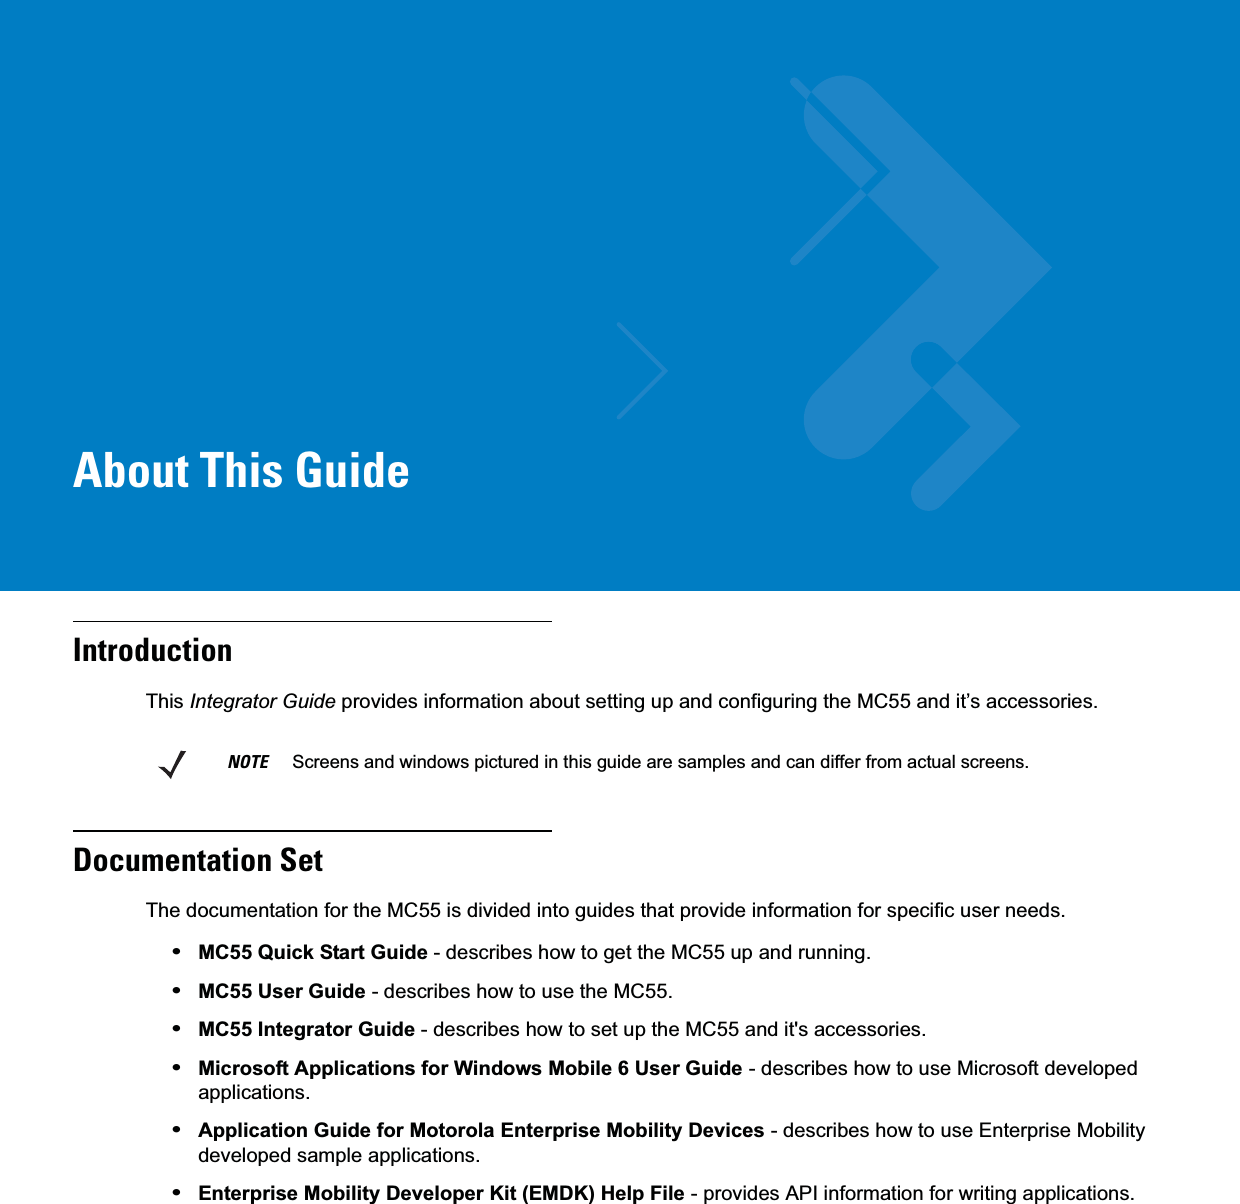 About This GuideIntroductionThis Integrator Guide provides information about setting up and configuring the MC55 and it’s accessories.Documentation SetThe documentation for the MC55 is divided into guides that provide information for specific user needs.•MC55 Quick Start Guide - describes how to get the MC55 up and running.•MC55 User Guide - describes how to use the MC55.•MC55 Integrator Guide - describes how to set up the MC55 and it&apos;s accessories.•Microsoft Applications for Windows Mobile 6 User Guide - describes how to use Microsoft developed applications.•Application Guide for Motorola Enterprise Mobility Devices - describes how to use Enterprise Mobility developed sample applications.•Enterprise Mobility Developer Kit (EMDK) Help File - provides API information for writing applications.NOTE     Screens and windows pictured in this guide are samples and can differ from actual screens.